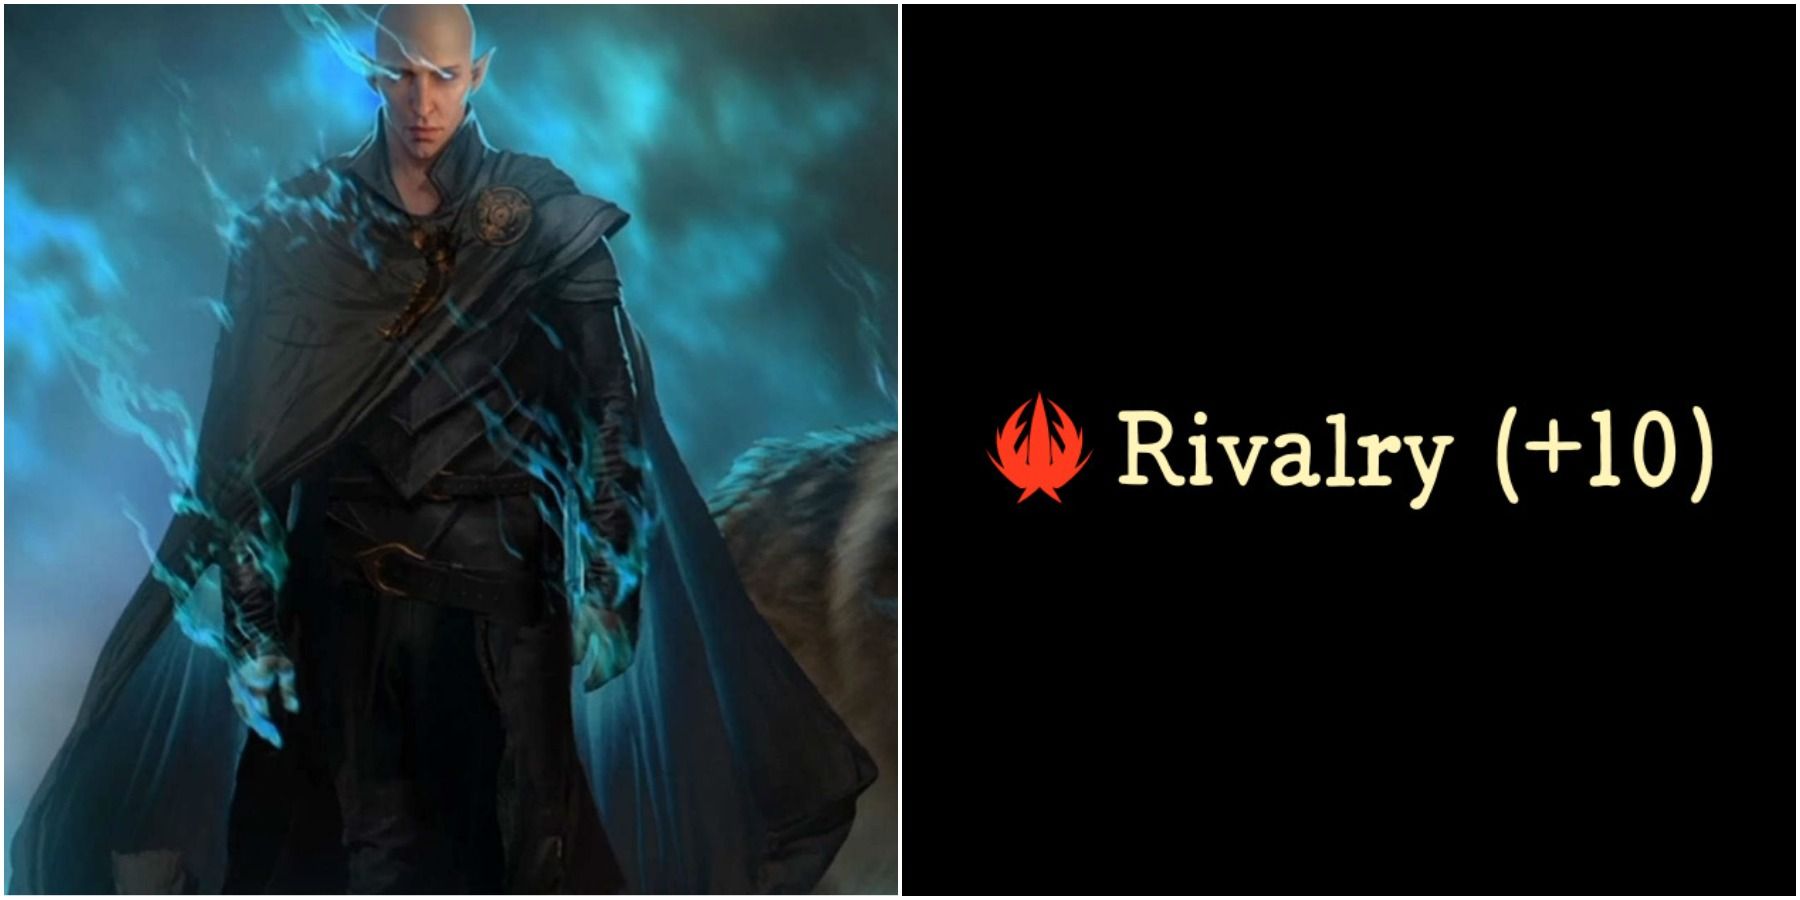 Split image of Solas and rivalry points.